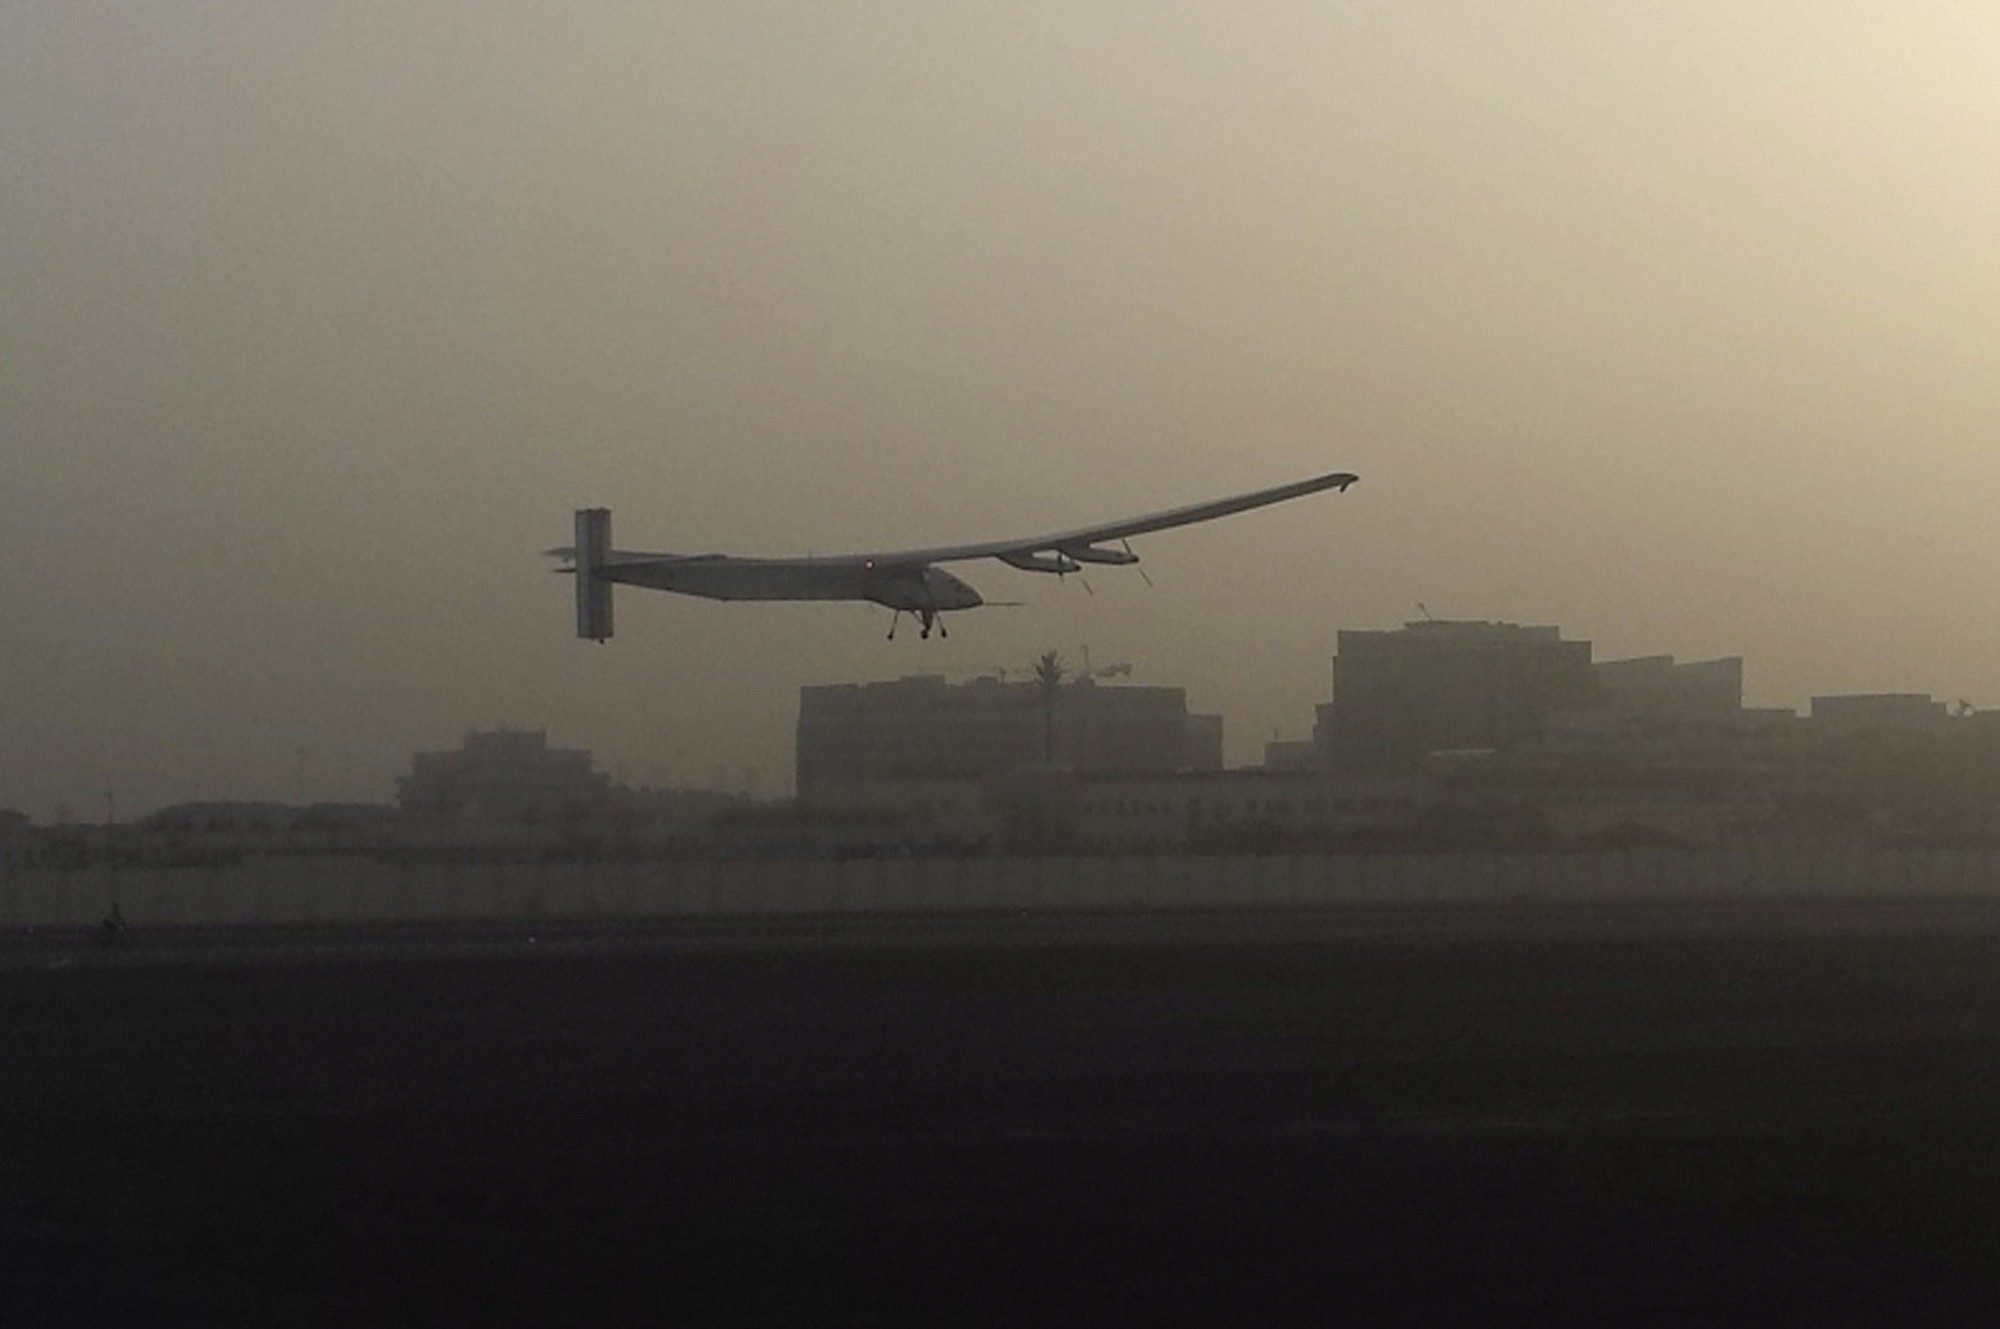 A Swiss solar-powered plane takes off at an airport in Abu Dhabi, United Arab Emirates, early Monday,, marking the start of the first attempt to fly around the world without a drop of fuel.